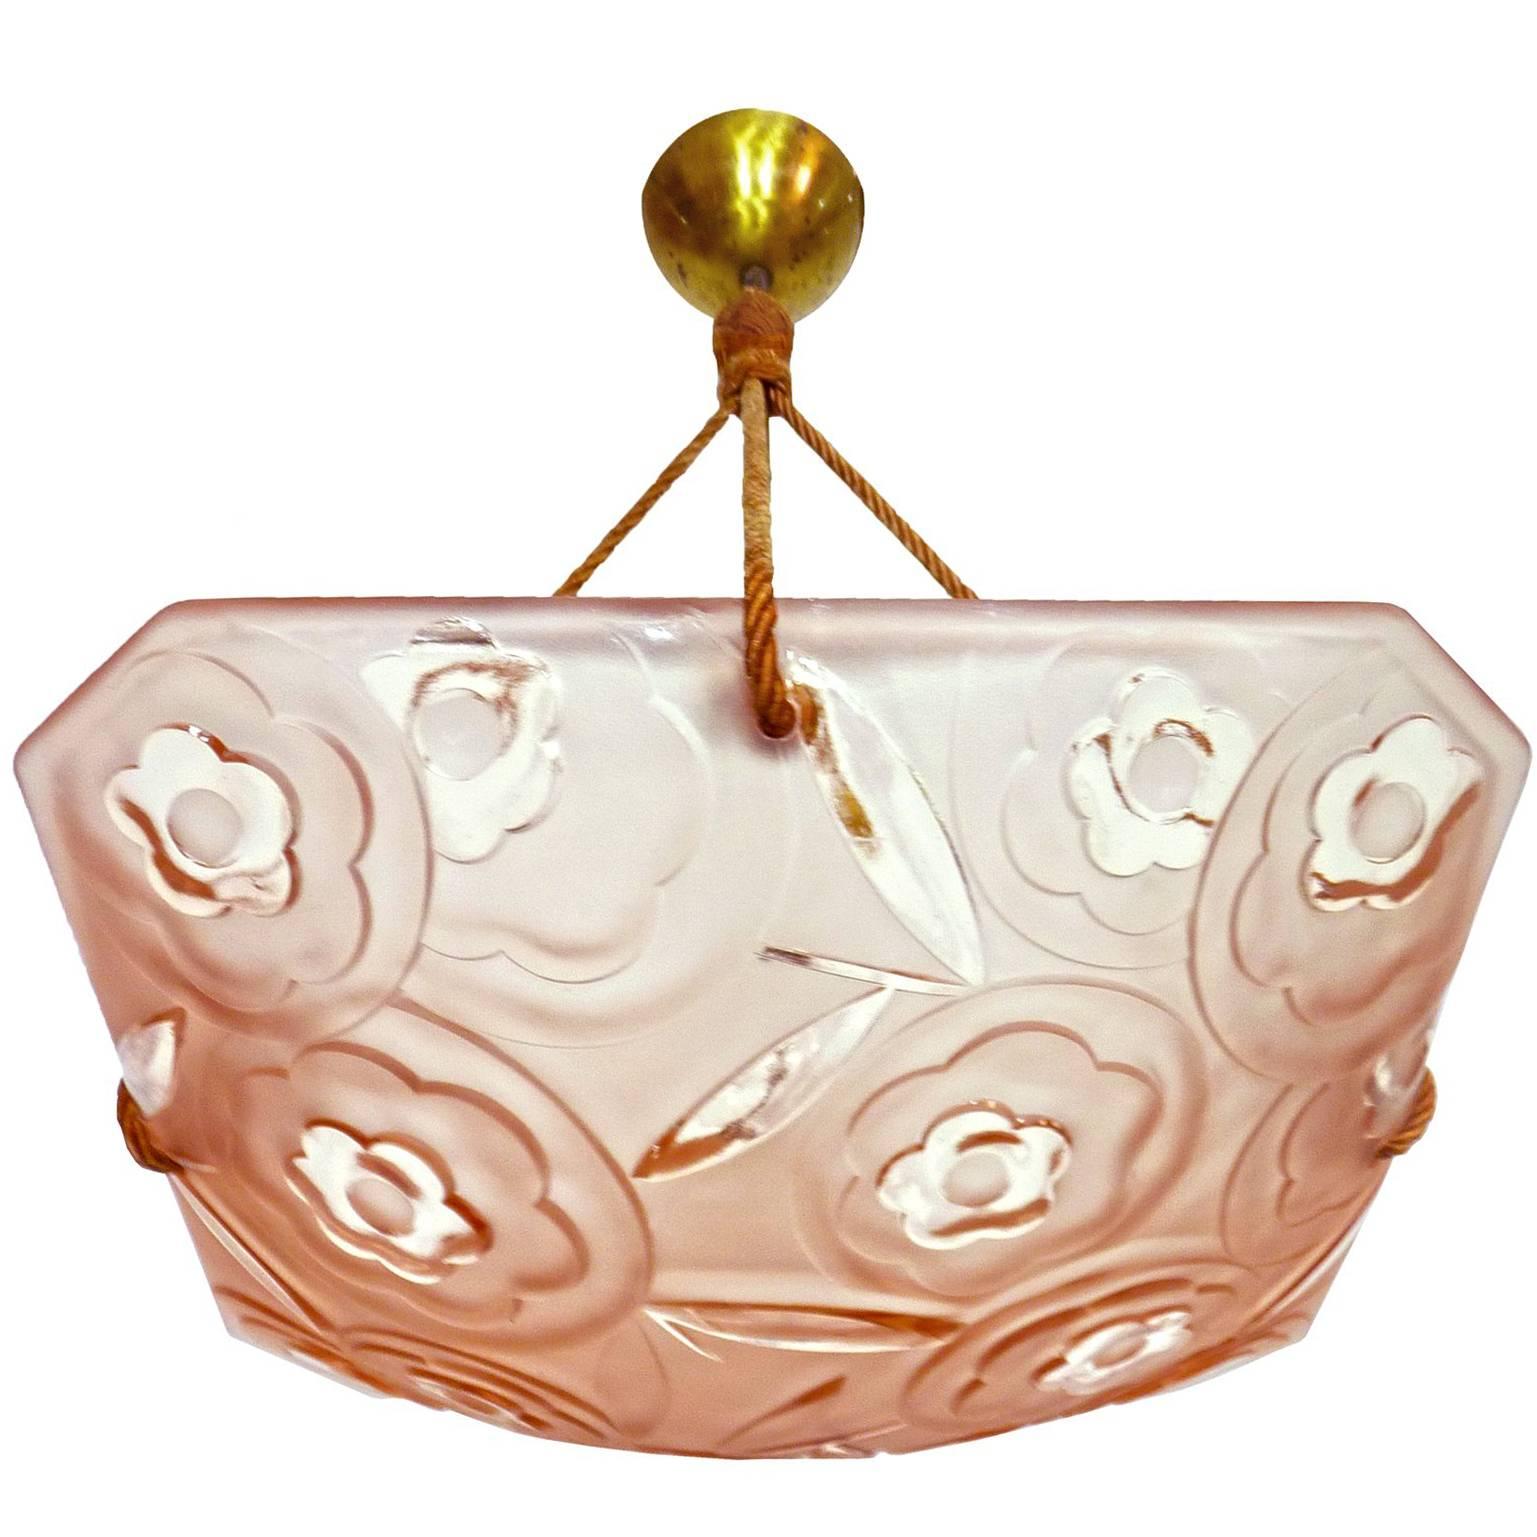 Beautiful French Art Deco chandelier or pendant with pink glass shade with floral and leaf pattern signed by Degué, silk cord
Measures:
Width: 16 in / 40 cm
Diagonal: 18 in / 45 cm
Height: 20 in / 50 cm
Weight 8 lb. (4 kg)
One light bulb E 27